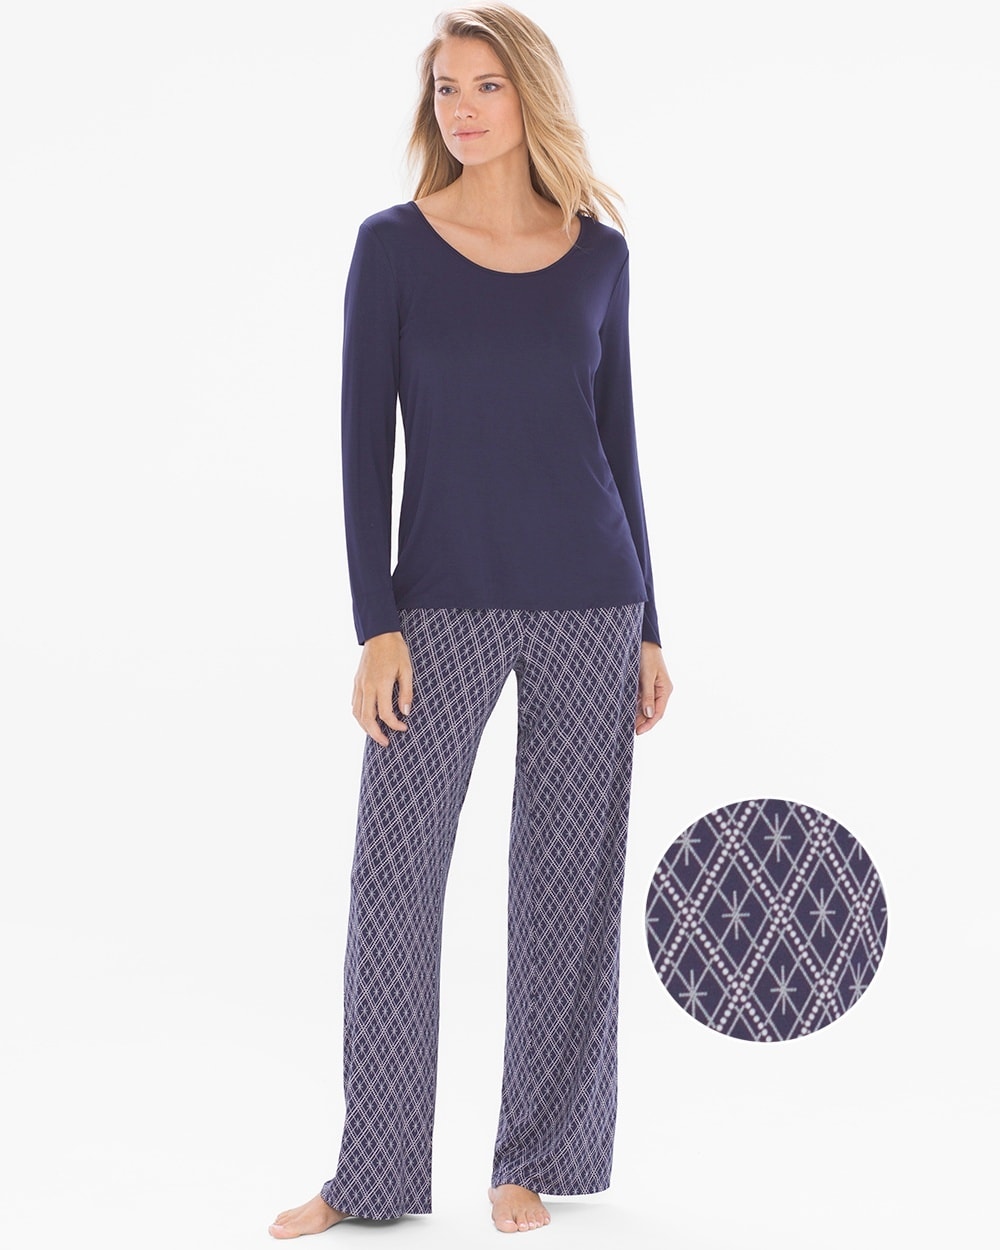 Cool Nights Long Sleeve Pajama Set Sparkling Geo with Navy TL